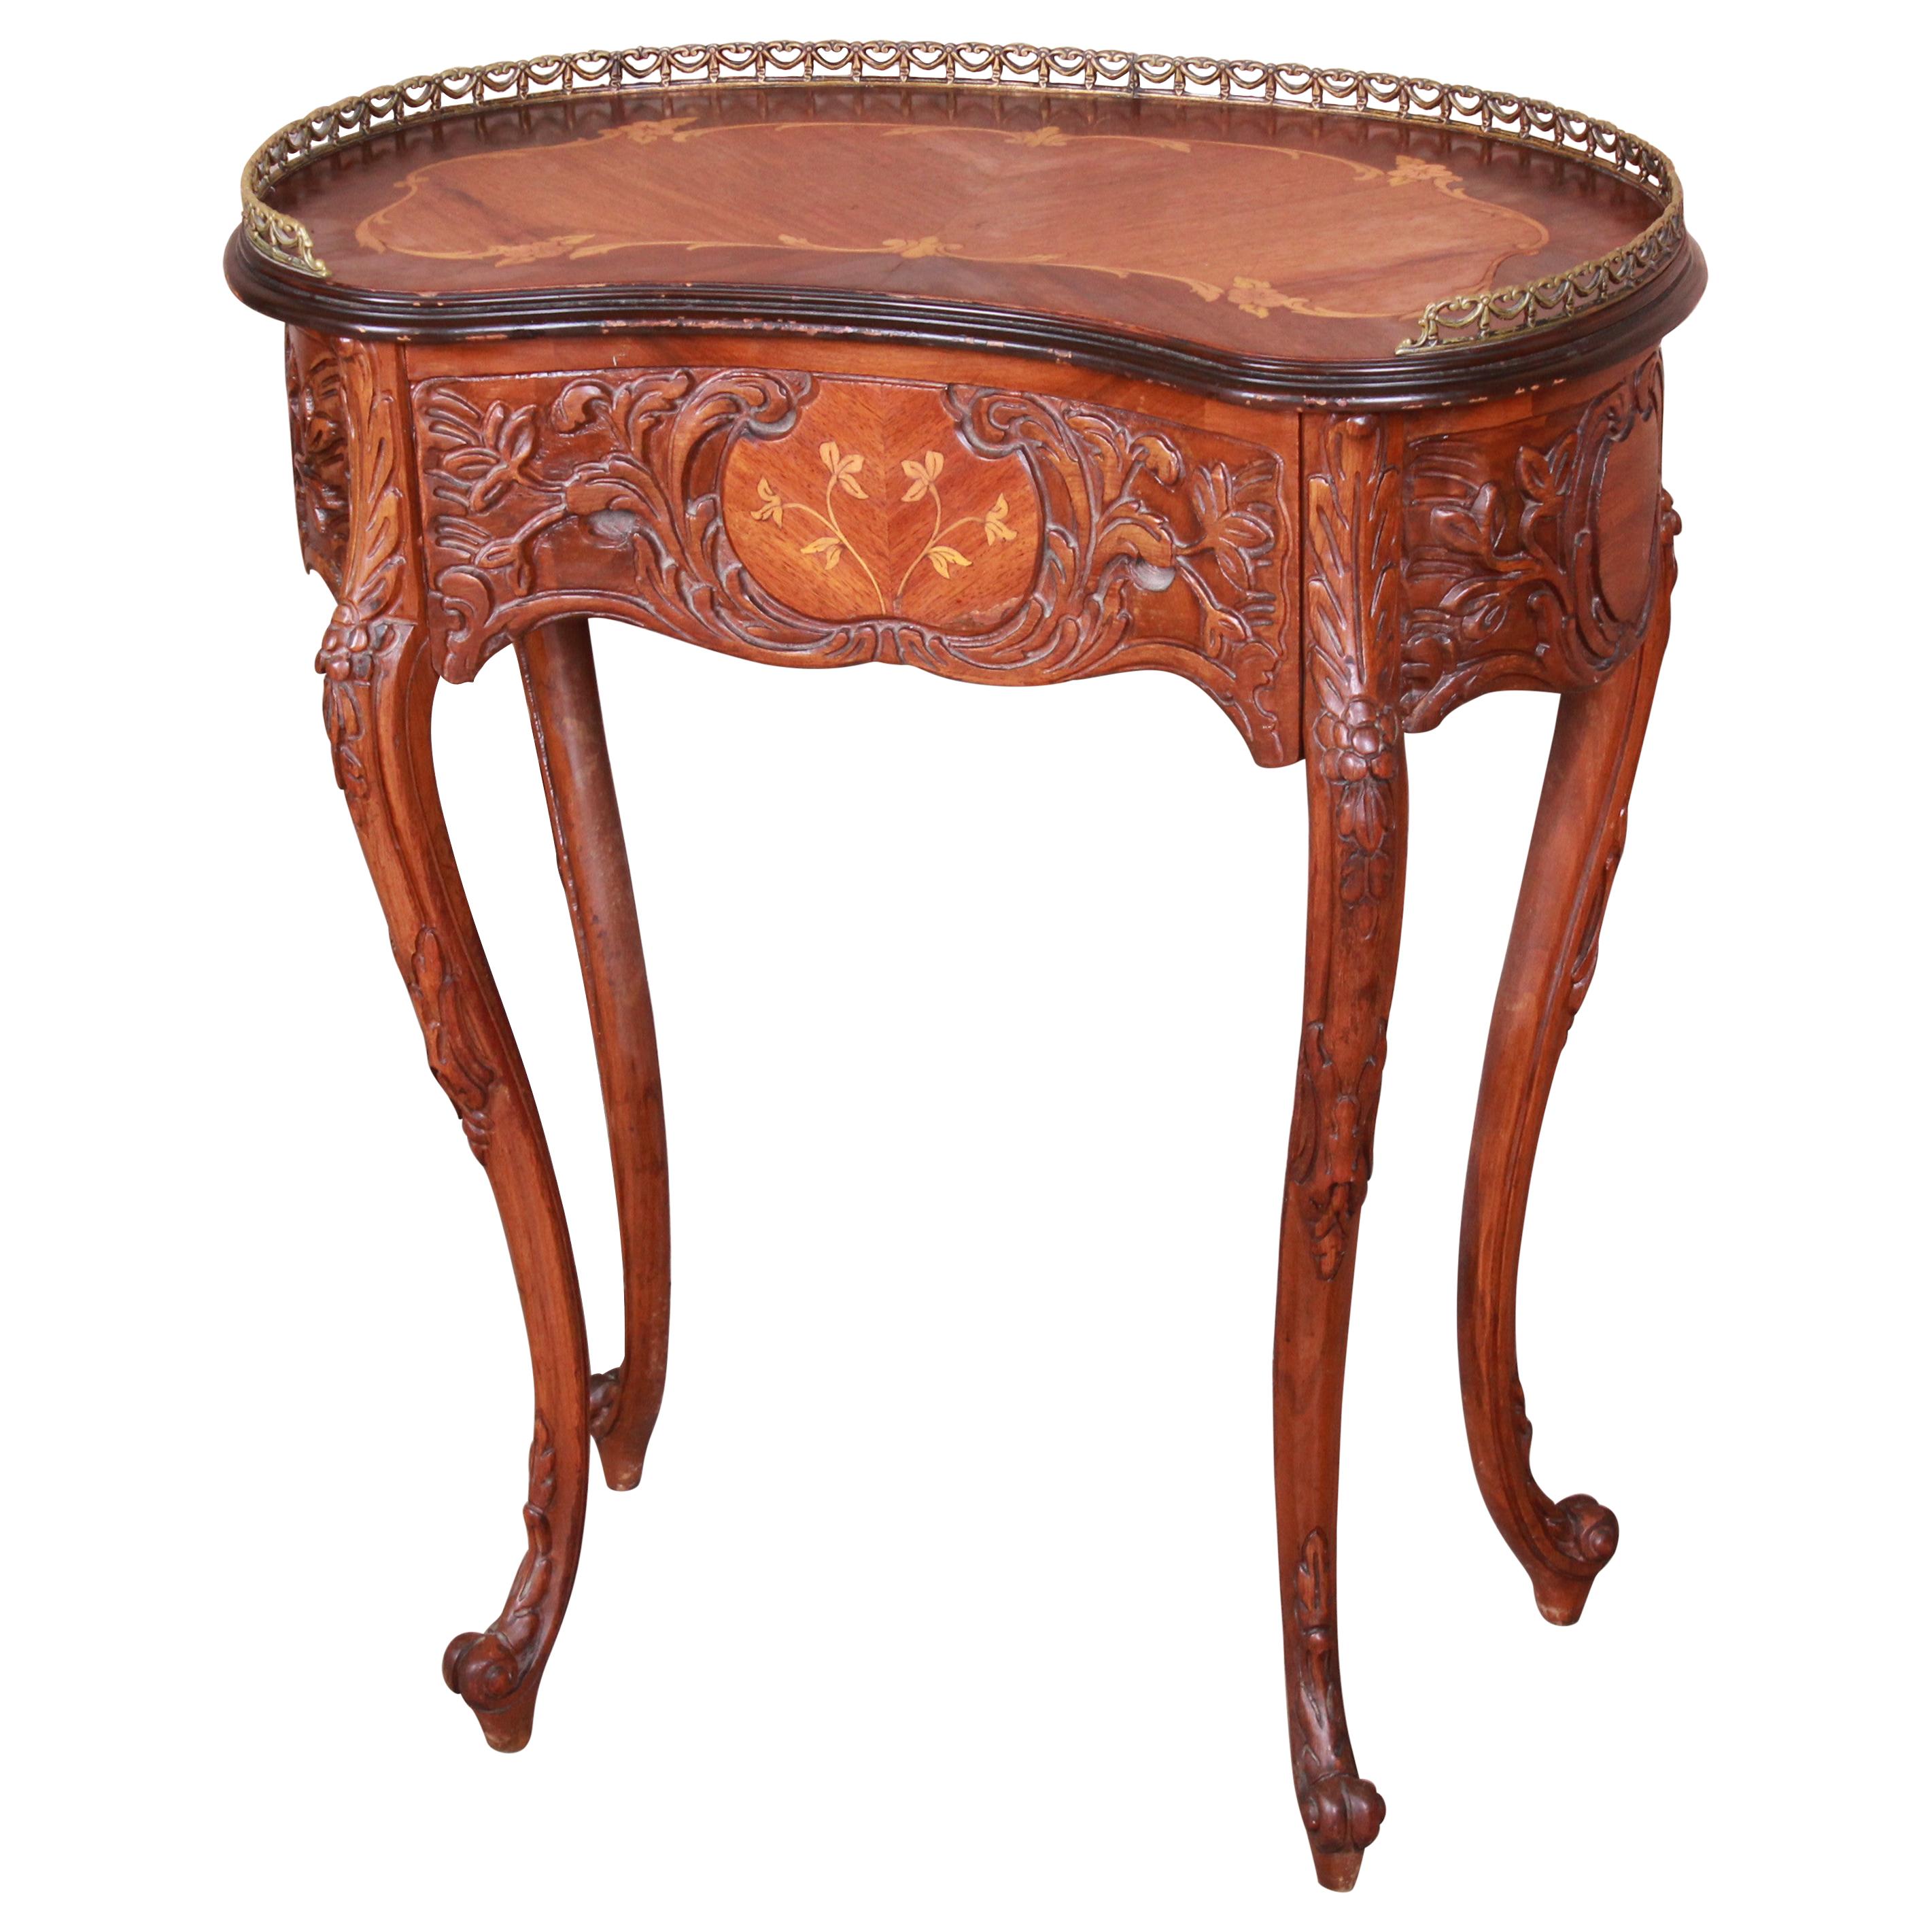 French Provincial Louis XV Inlaid Mahogany Kidney Shape Nightstand or Side Table